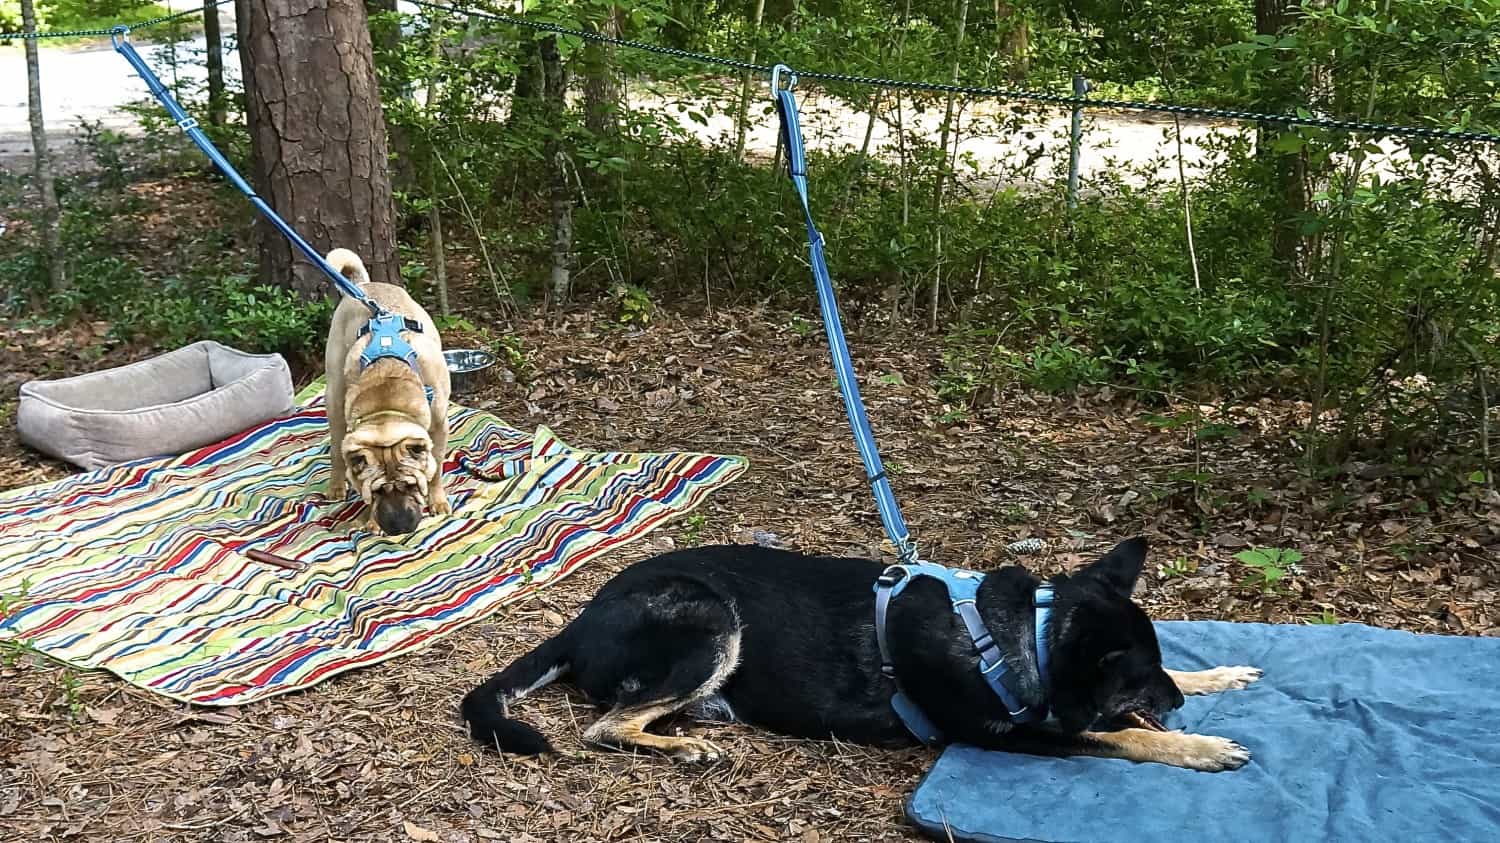  Ty the Shar-pei and Buster the German Shepherd from GoPetFriendly.com relaxing on their zip line in a camping site